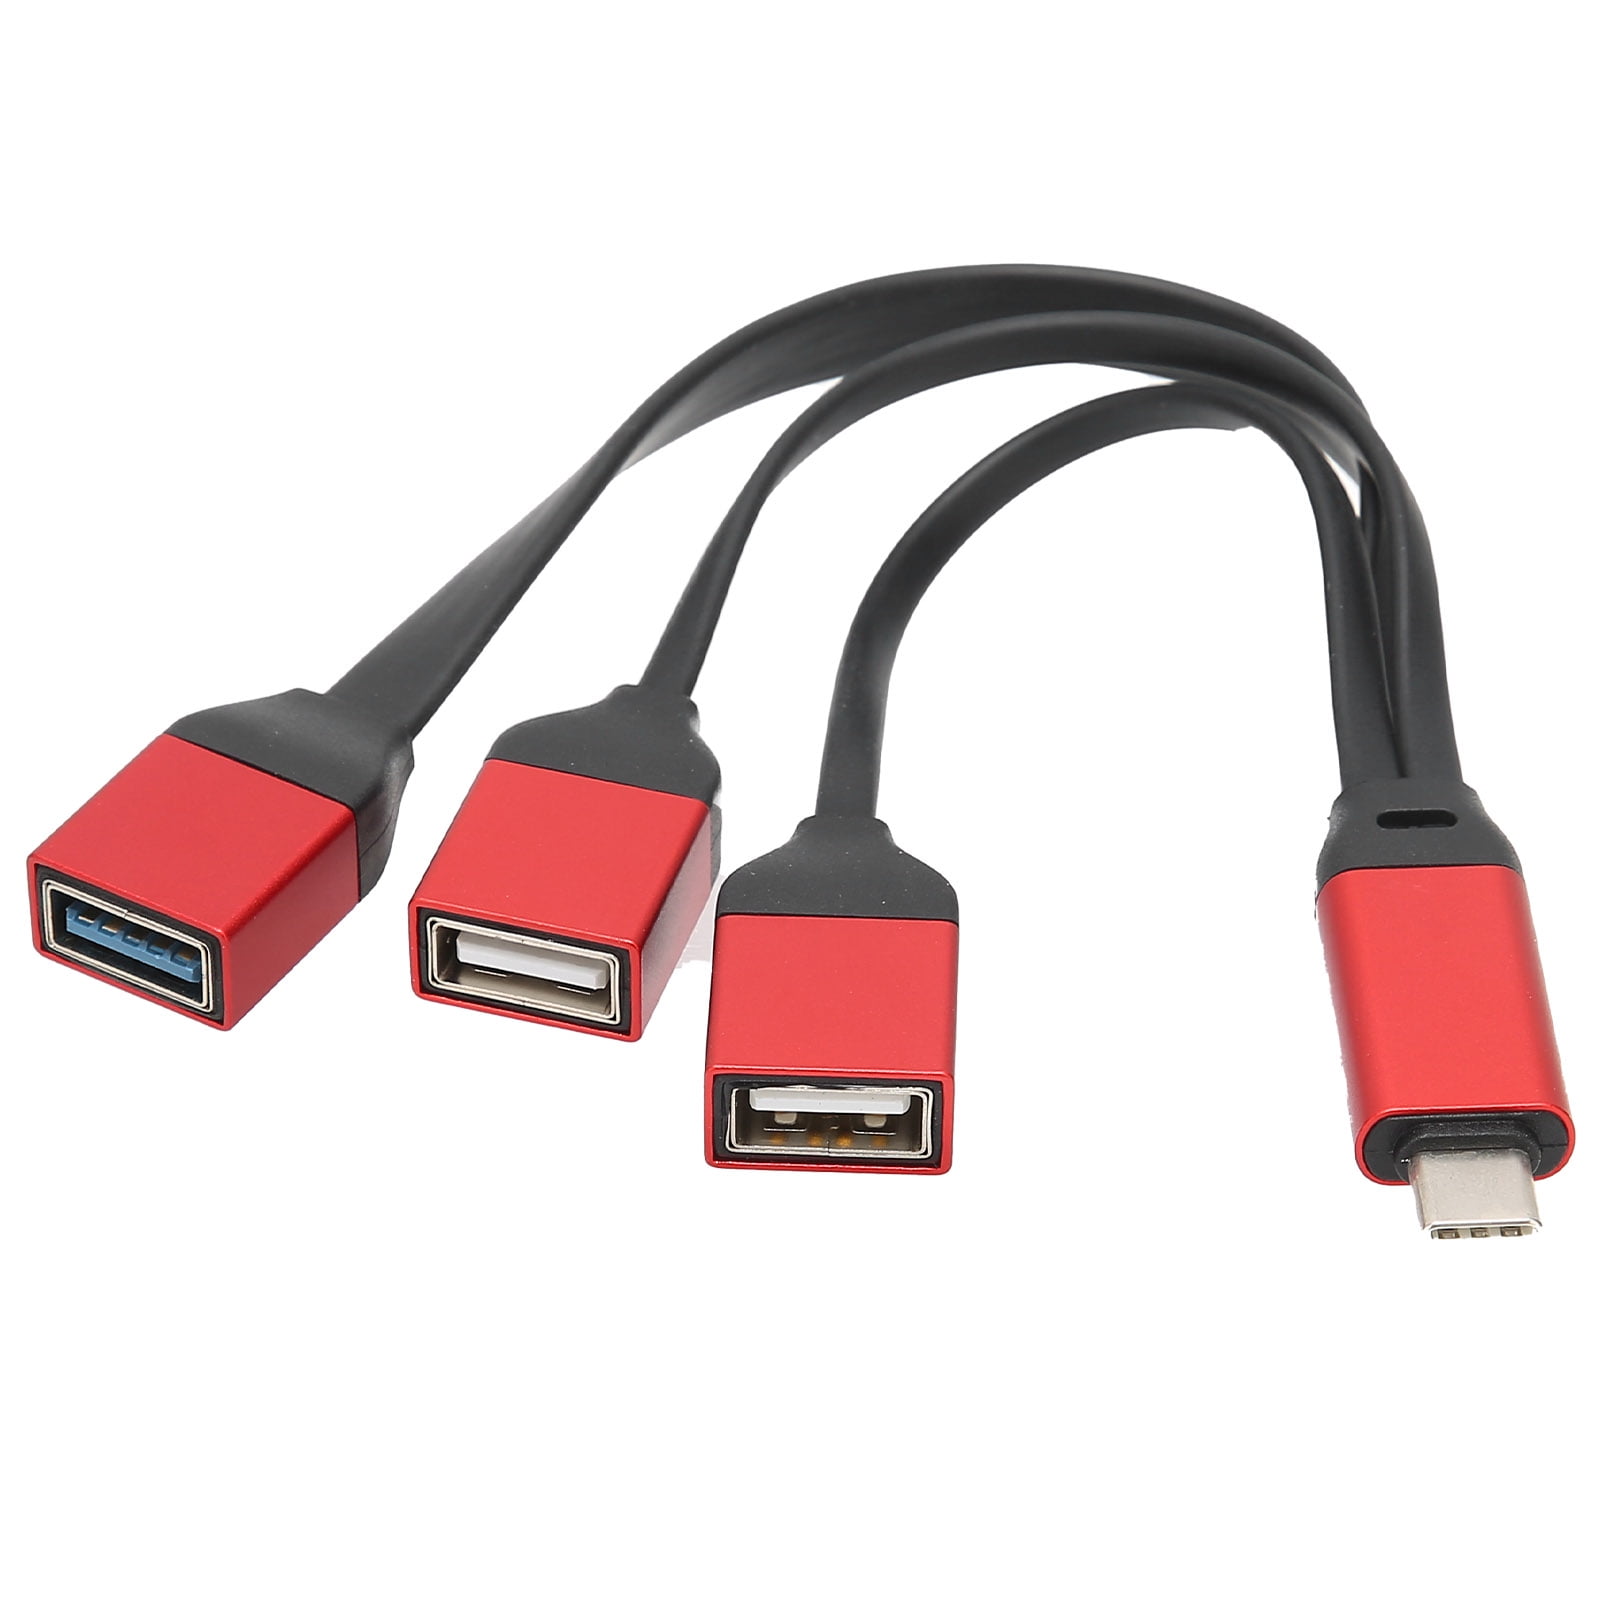 Prædiken ris Hofte Type-c 3.0 2.0 TypeC To USB 3.0/2.0 Cable Adapter Cable Converter Cord For  Tablet Computers Laptops - Walmart.com